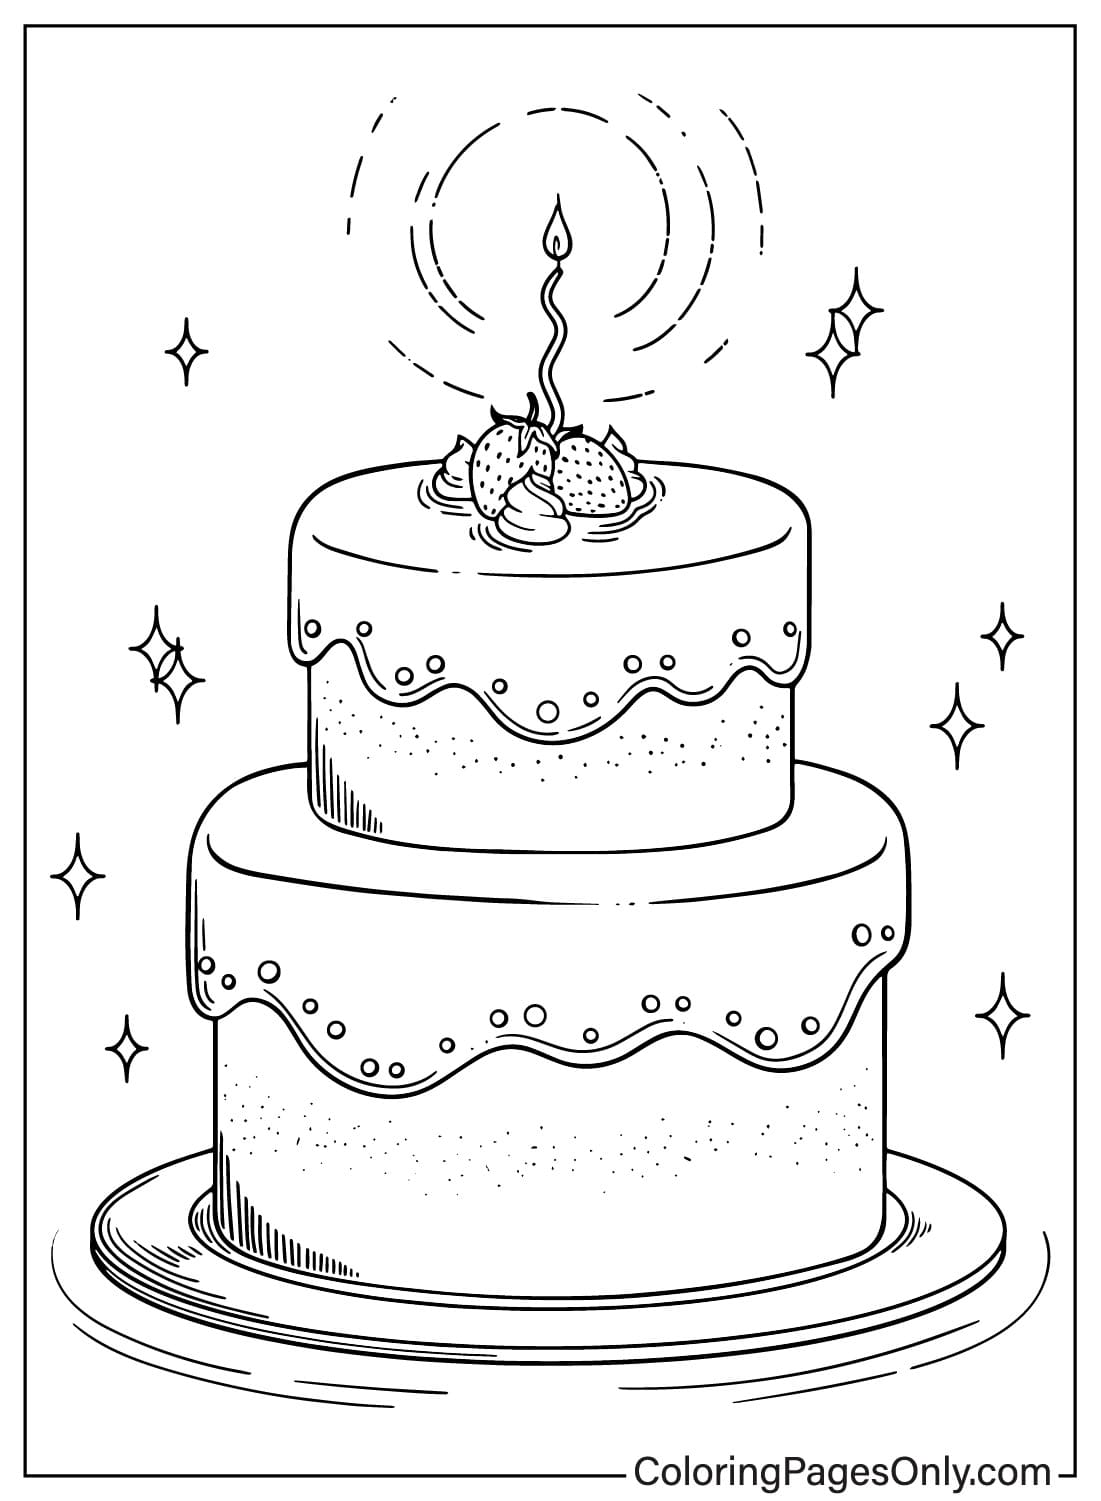 Birthday Cake Coloring Page to Printable from Birthday Cake